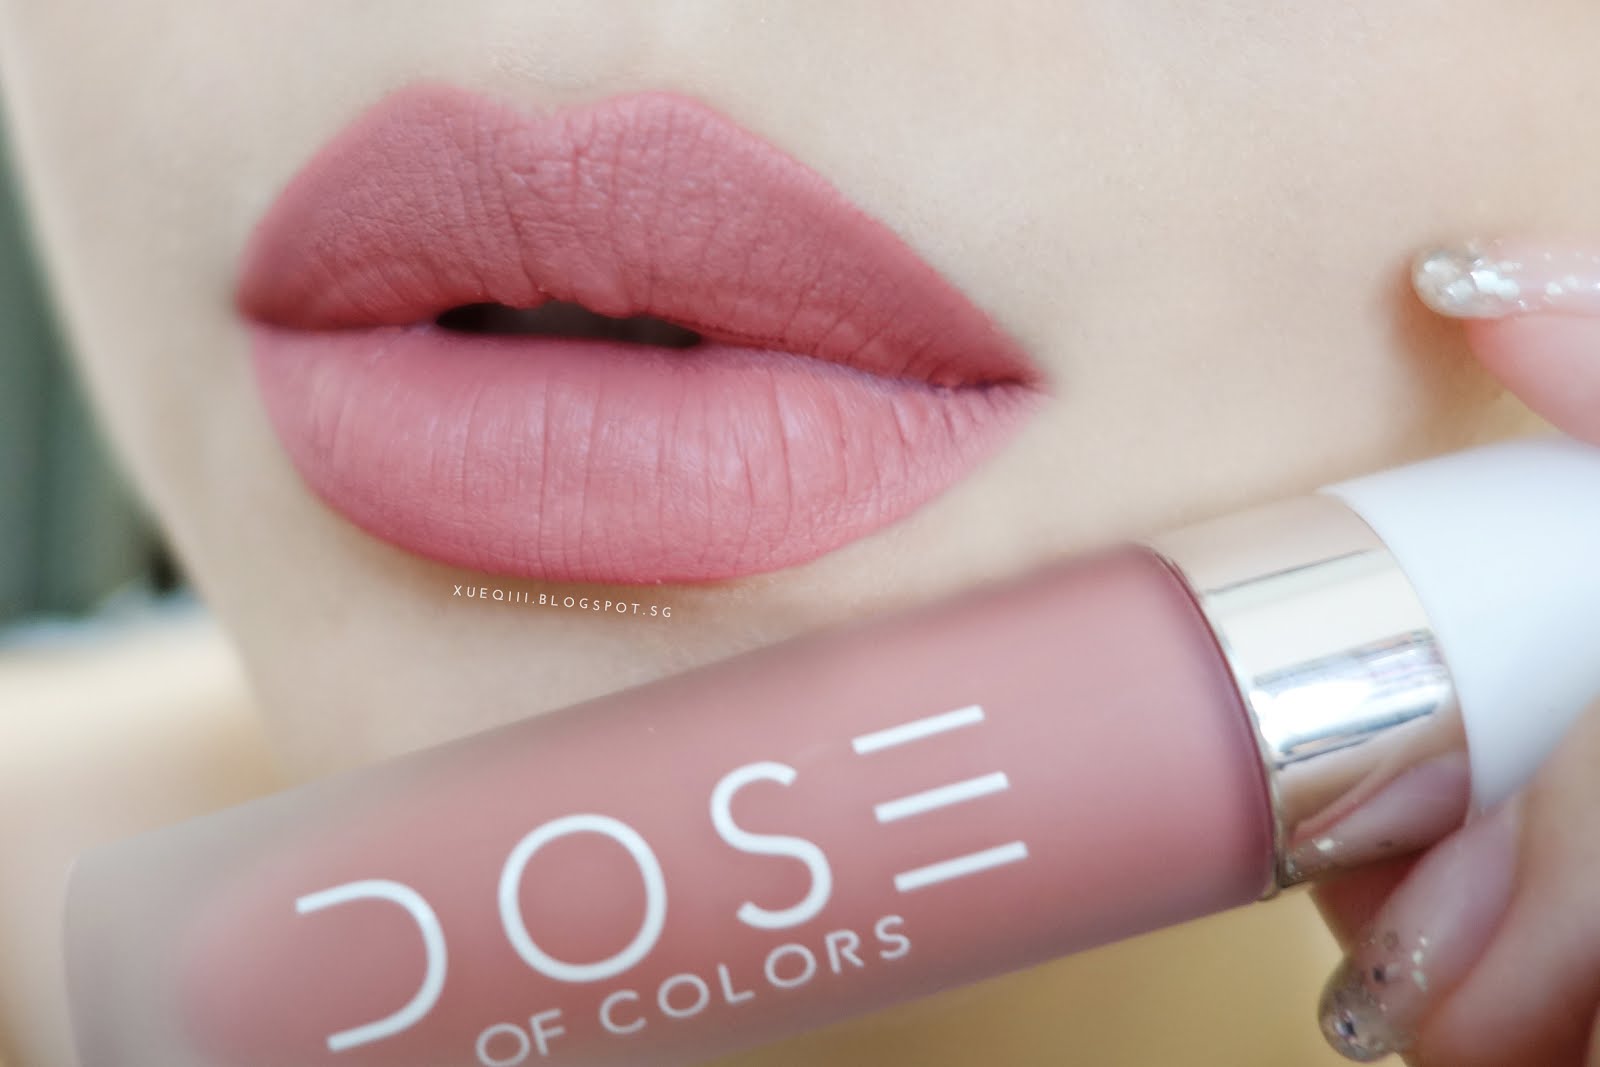 Dose of Colors Liquid Matte Lipstick Review and Swatches 